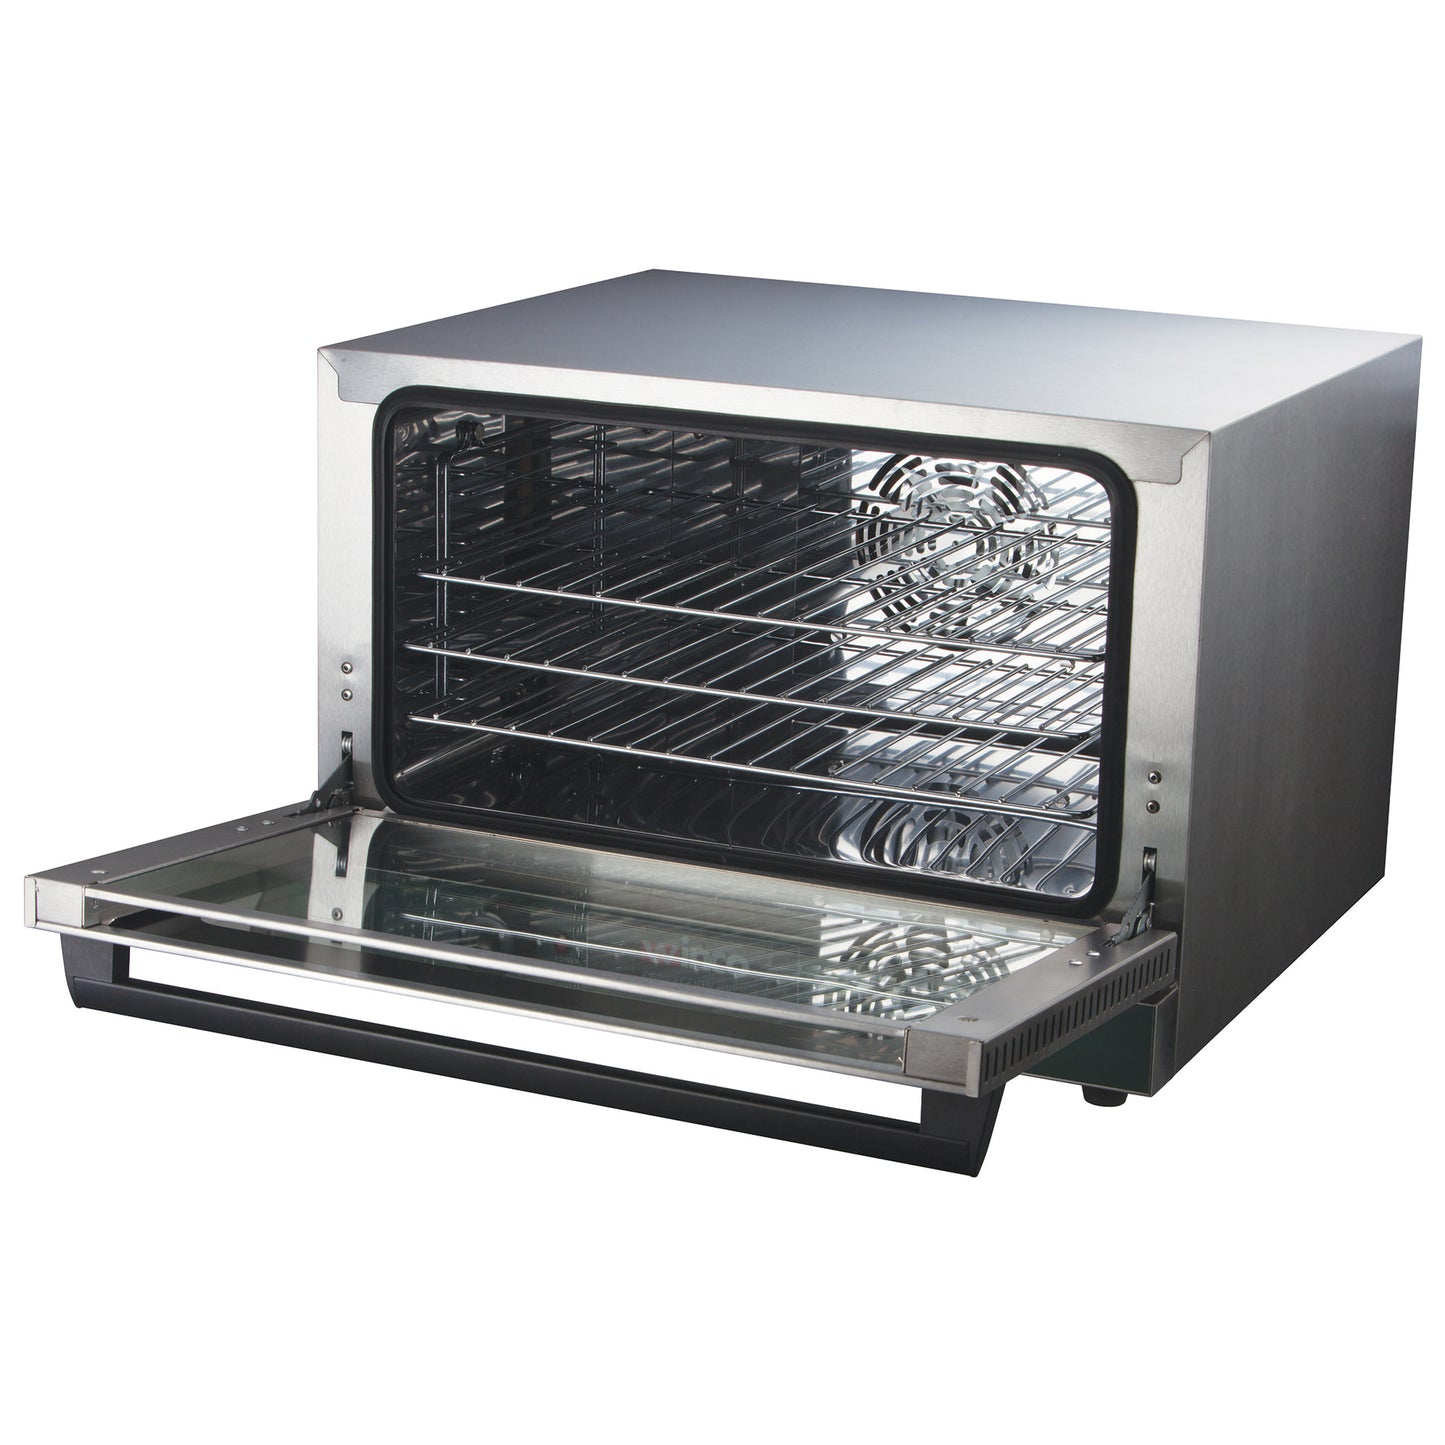 Half-Size Countertop Convection Oven, 1.5 Cubic Feet